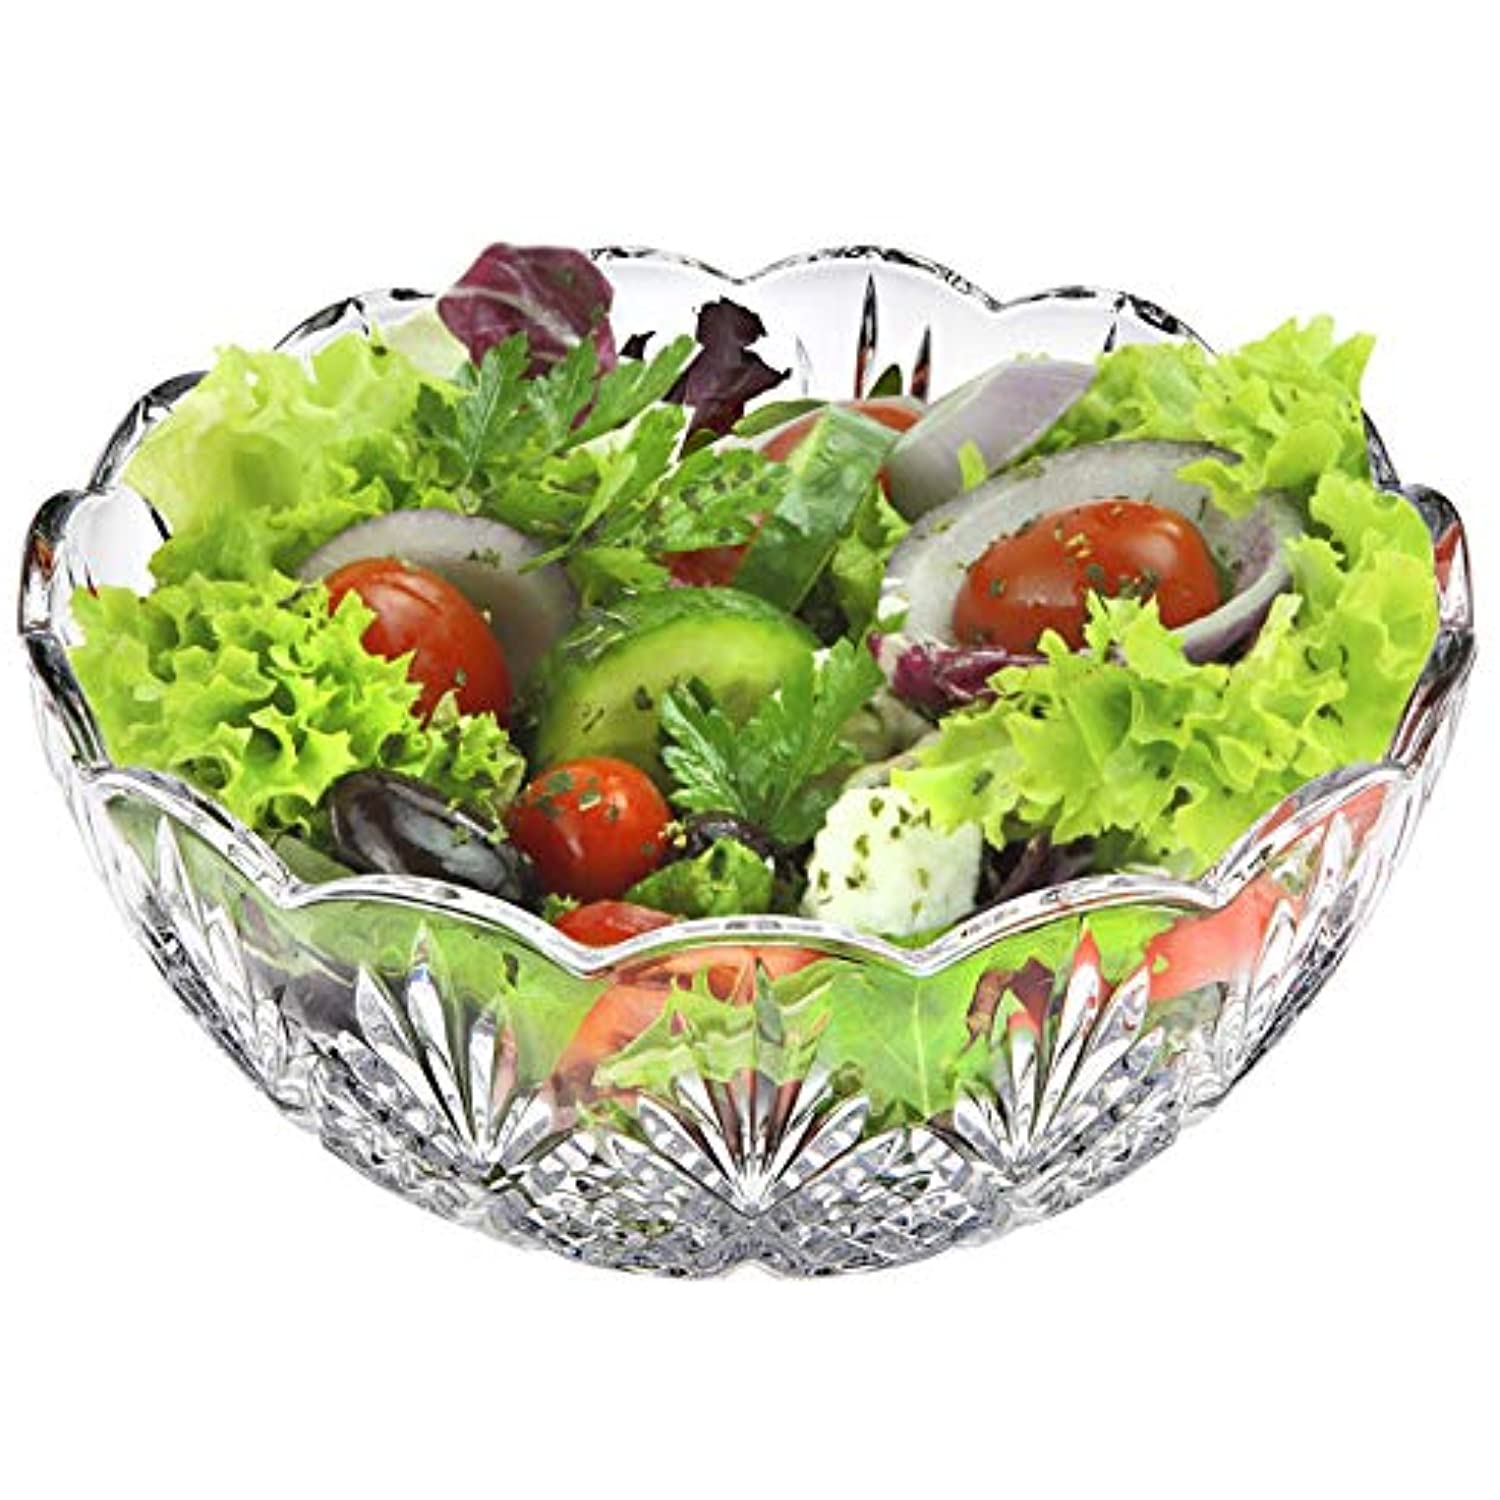 Elegant Large Crystal Clear Salad Bowl, Glass Mixing Bowl, All